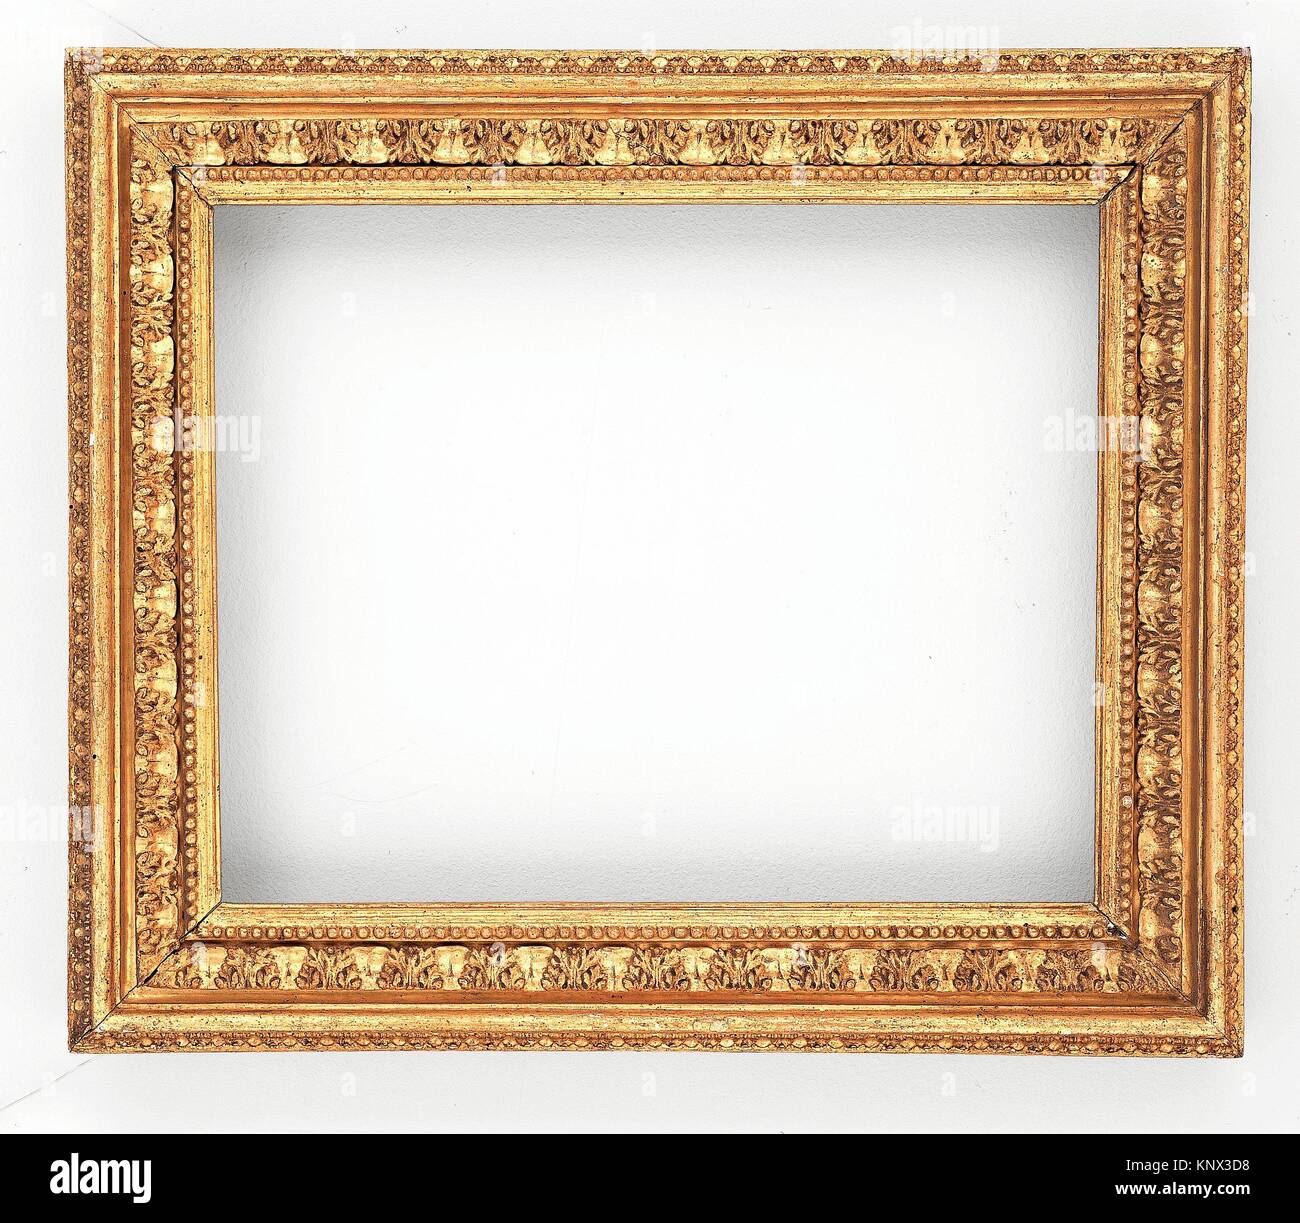 Frame. Artist: Italy (Rome) (late 17th century-early 18th century); Date: ca. 1680-1700; Medium: Poplar; Dimensions: Overall: 19 1/2 x 22 7/8 in. Stock Photo